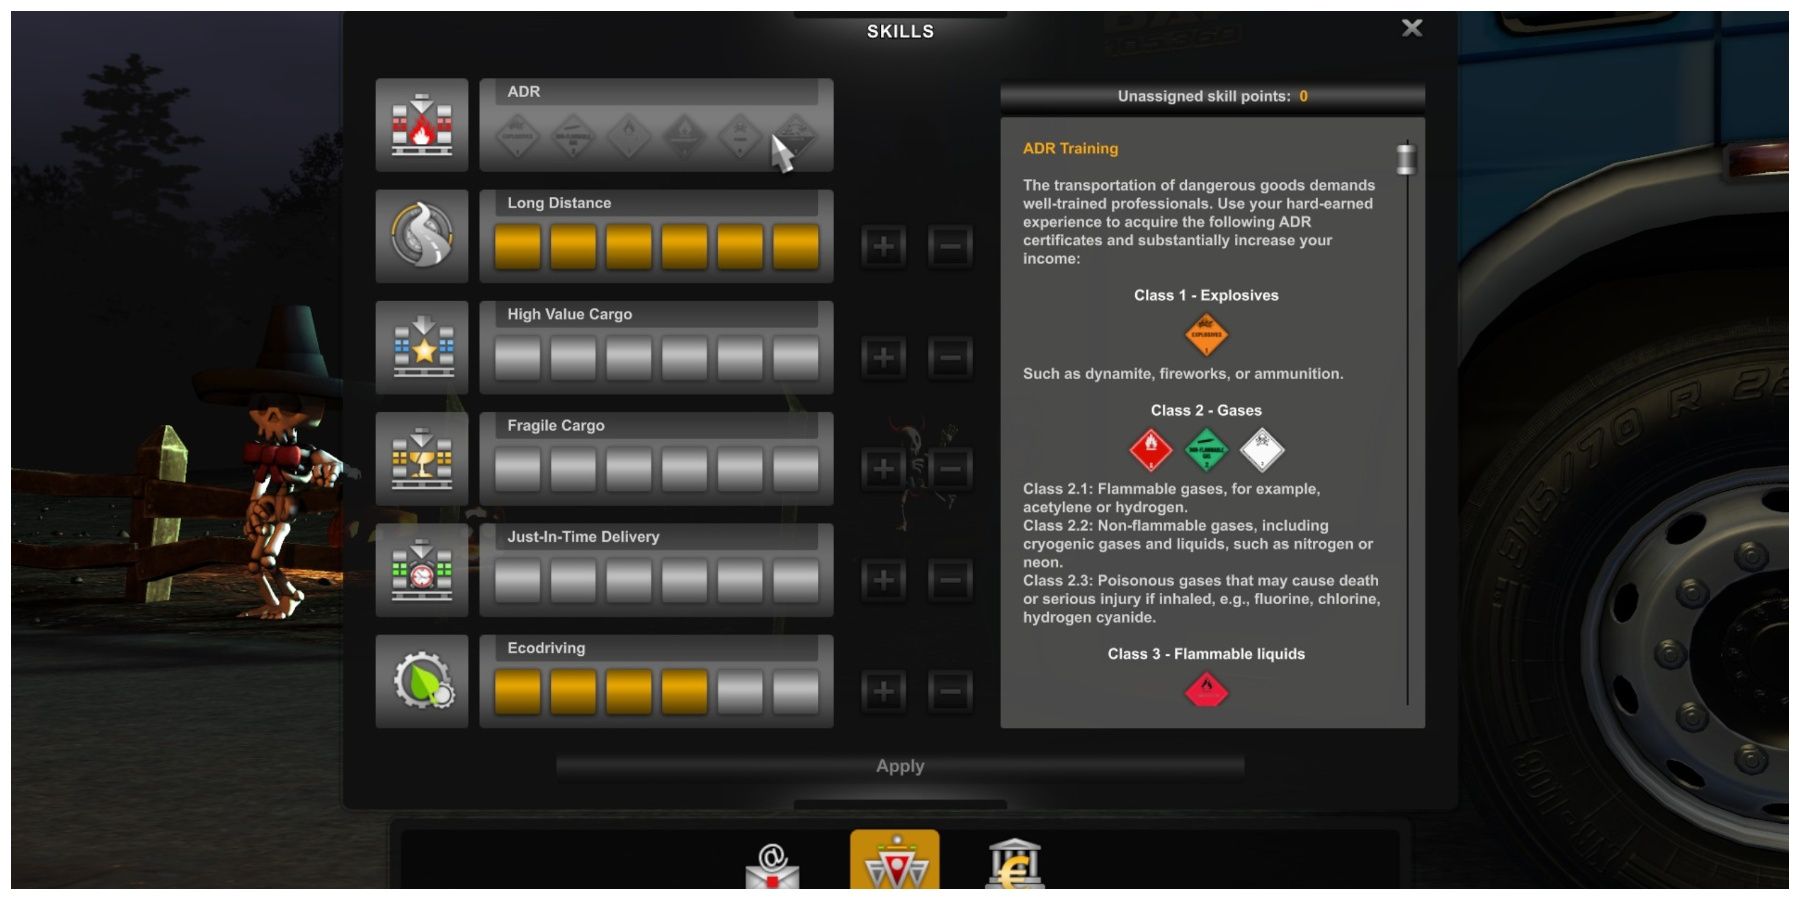 A screen showing the ranks of the ADR skill in Euro Truck Simulator 2